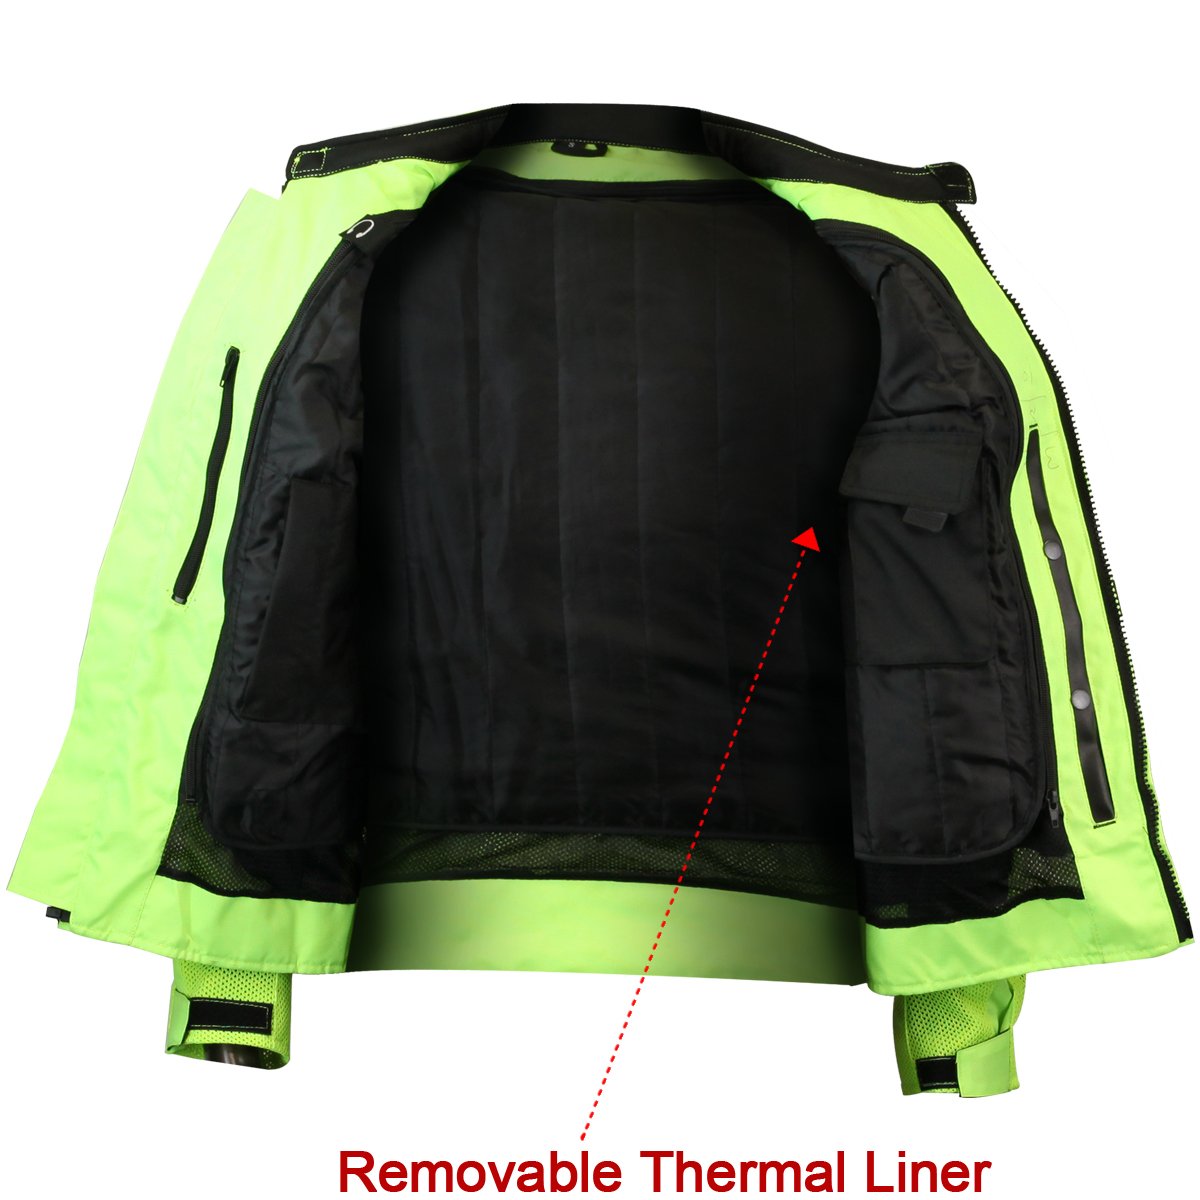 Vance Leather High Visibility Mesh Motorcycle Jacket with Insulated Liner and CE Armor